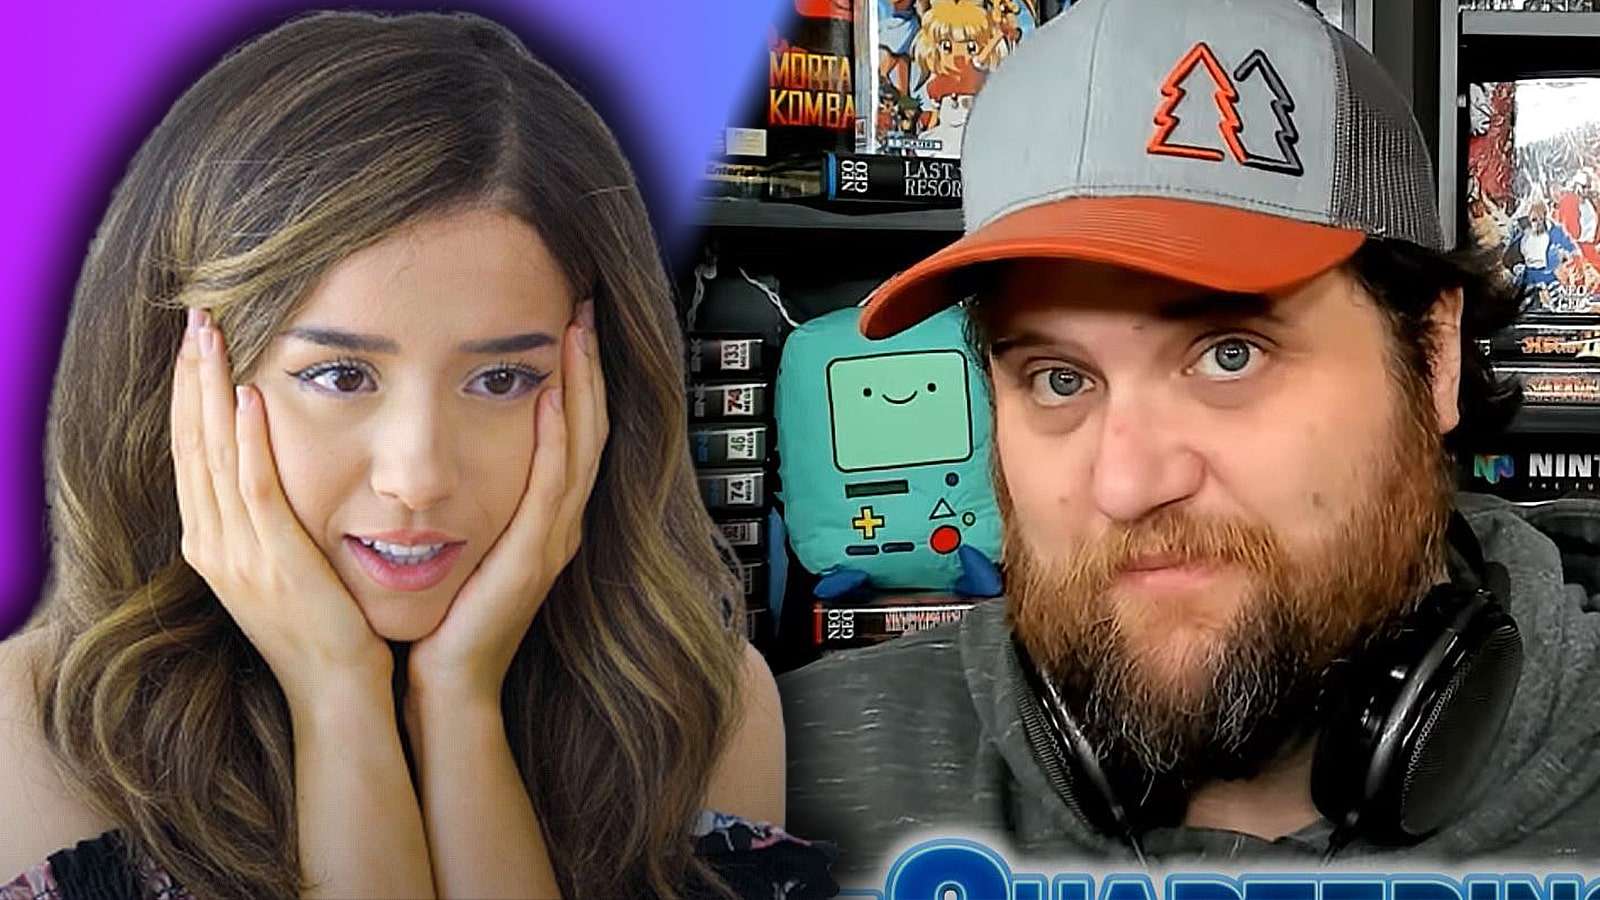 TheQuartering takes Pokimane to court over copyright notice